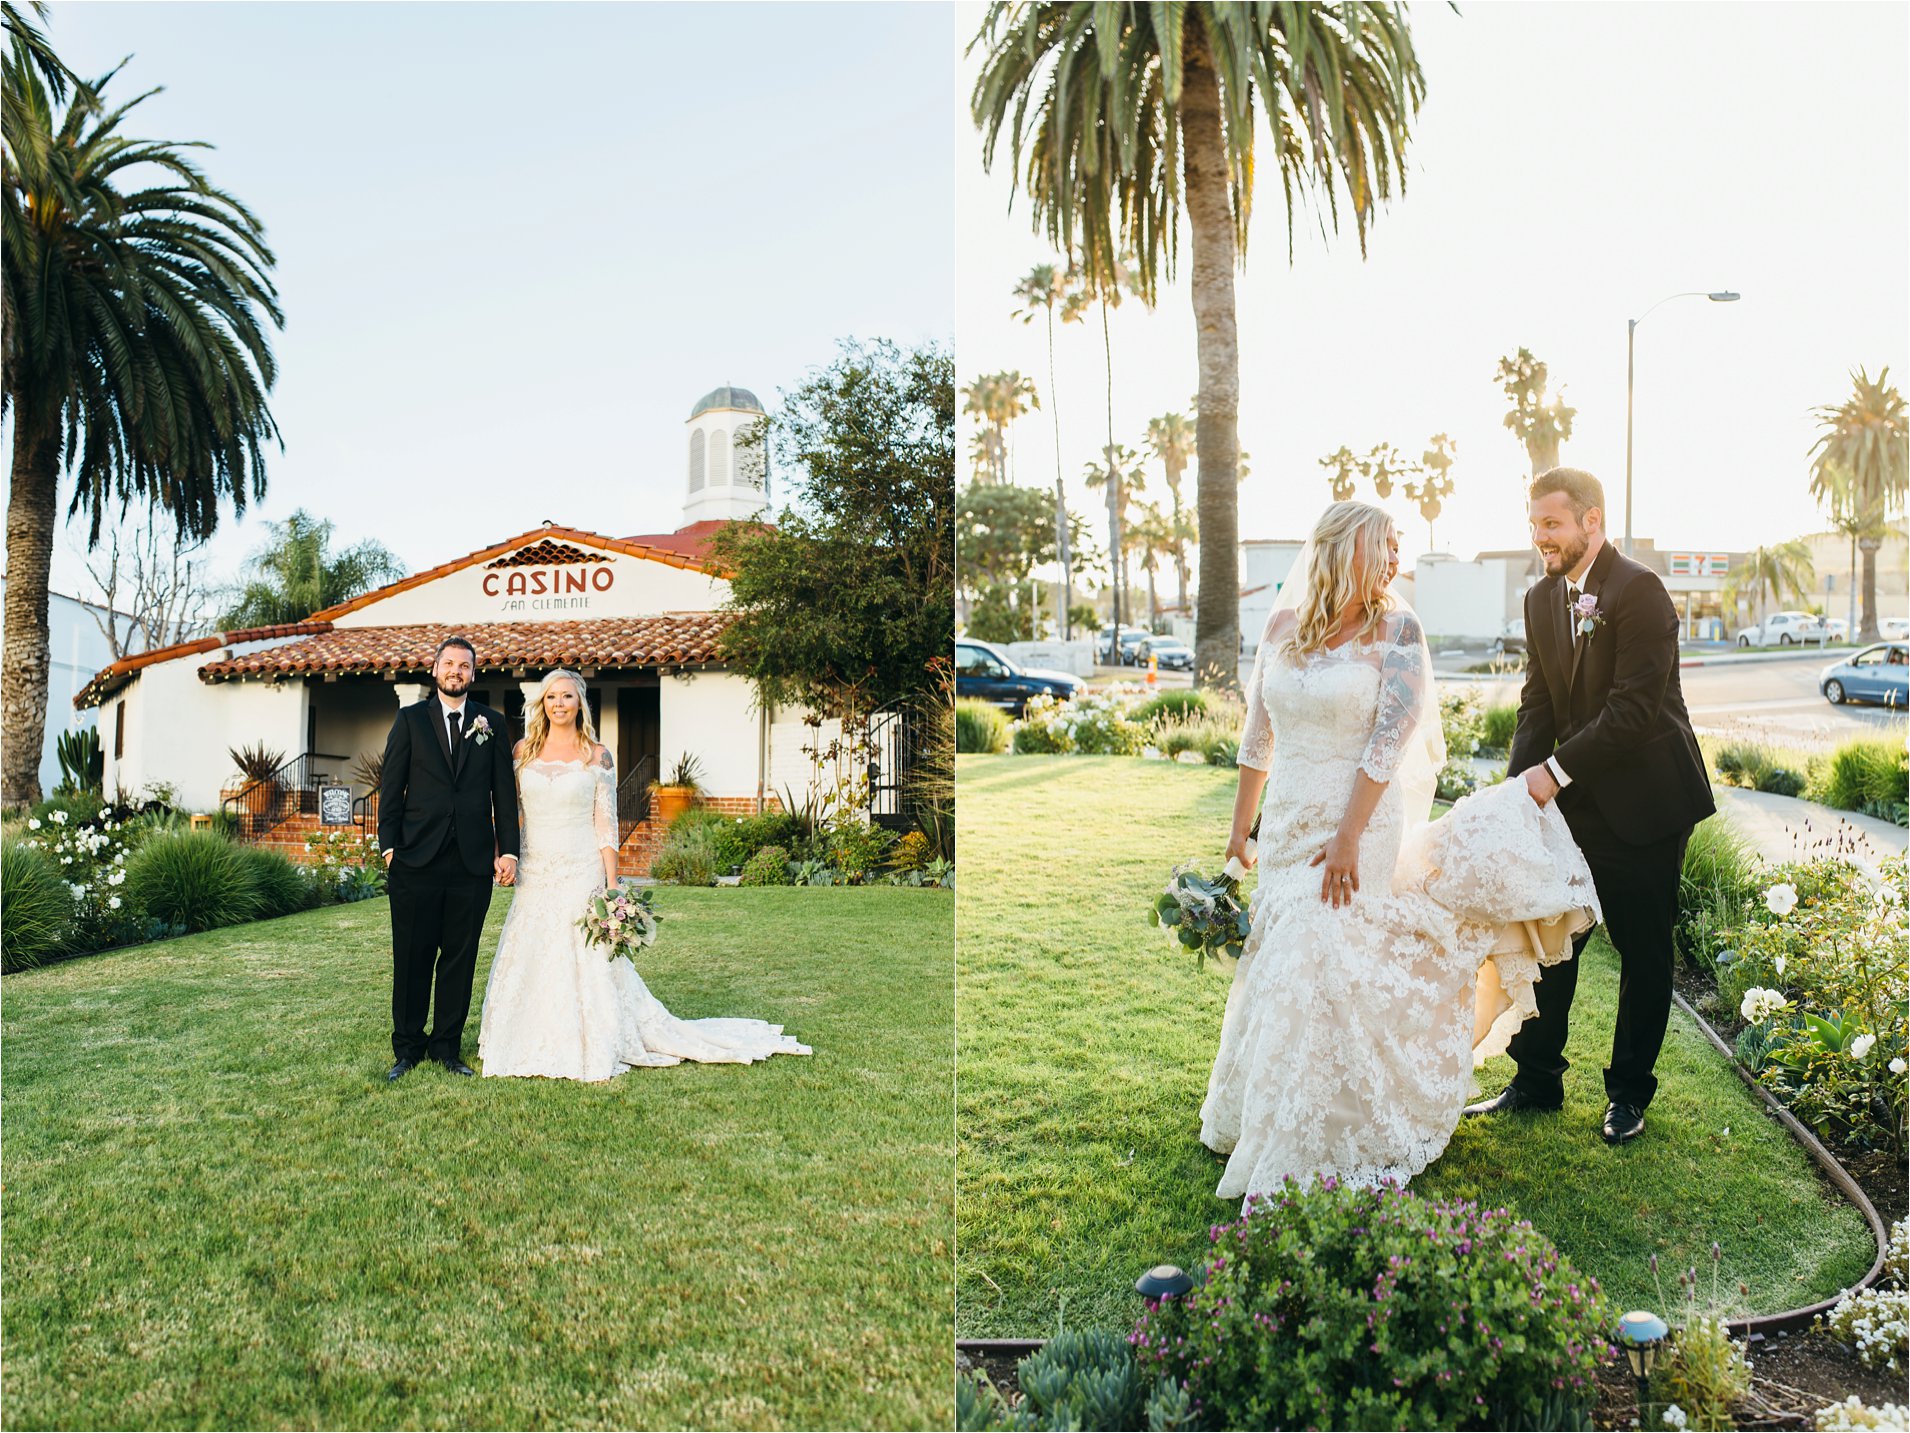 The Casino bride and groom in San Clemente, CA